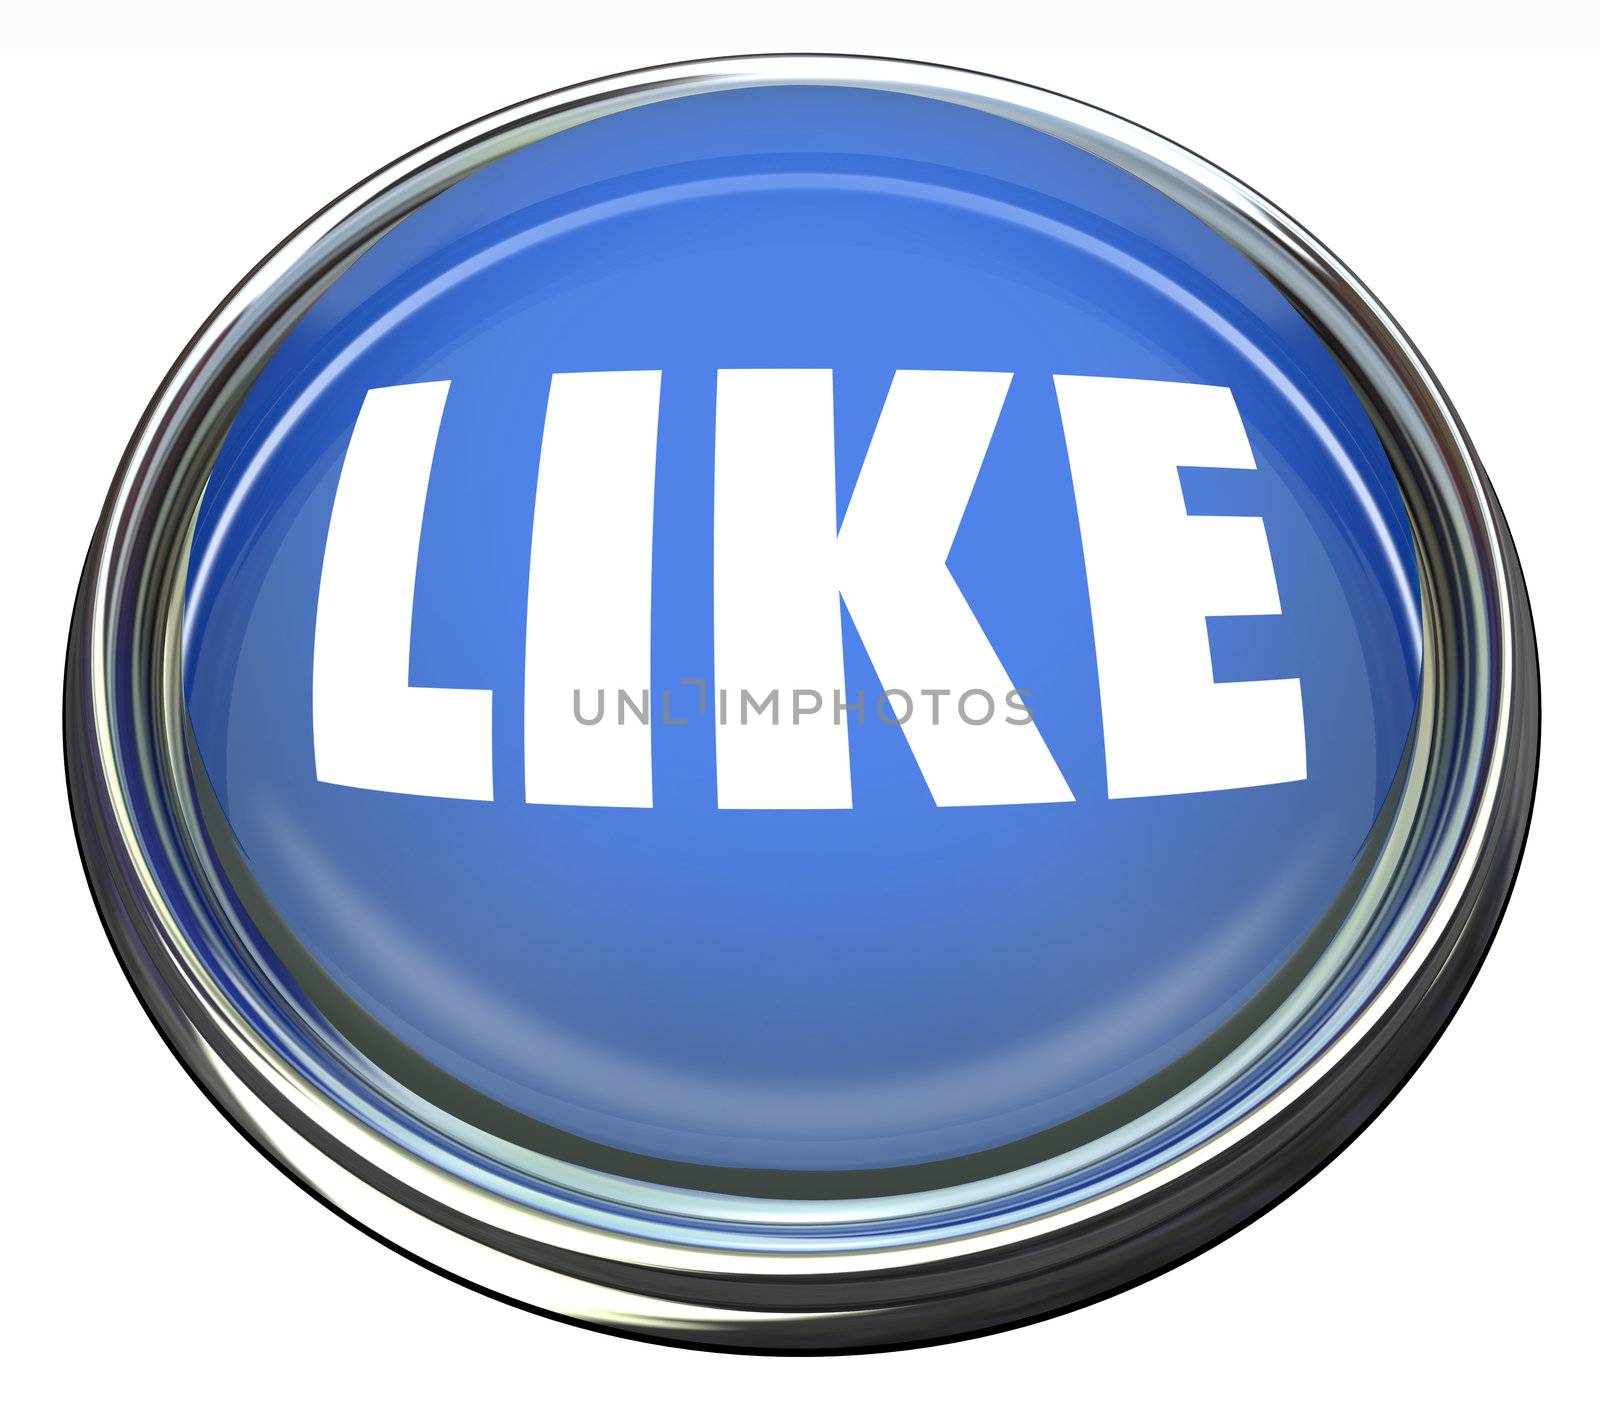 A round blue button with the word Like to indicate your approval or enjoyment of a website, social network, remark